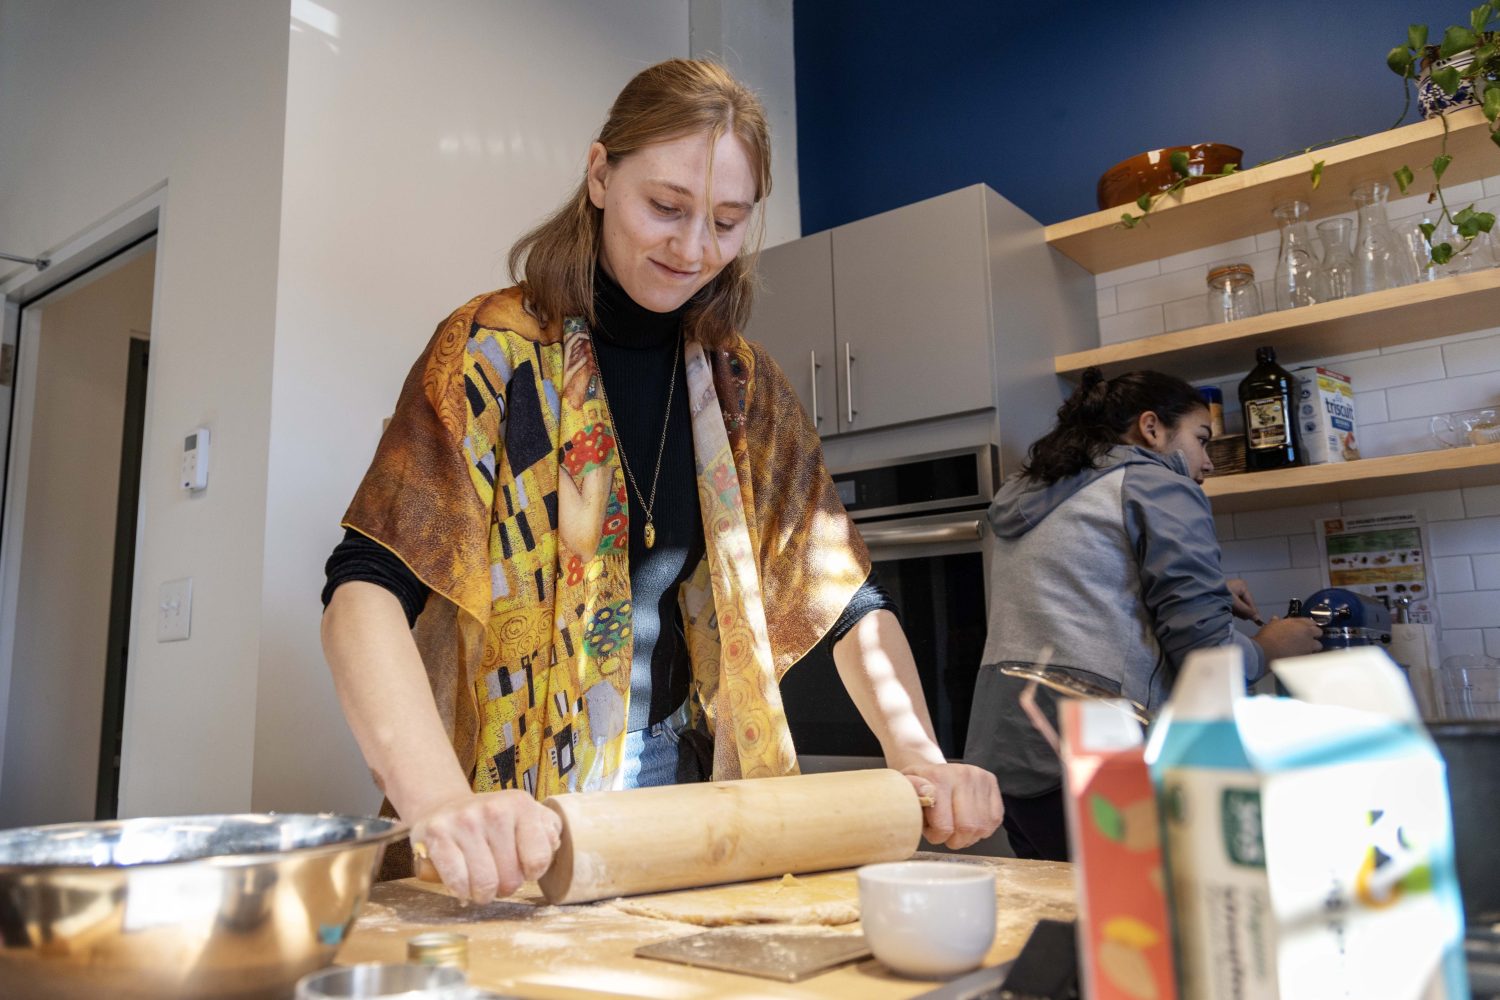 A student uses a rolling pin to roll out the beignet dough